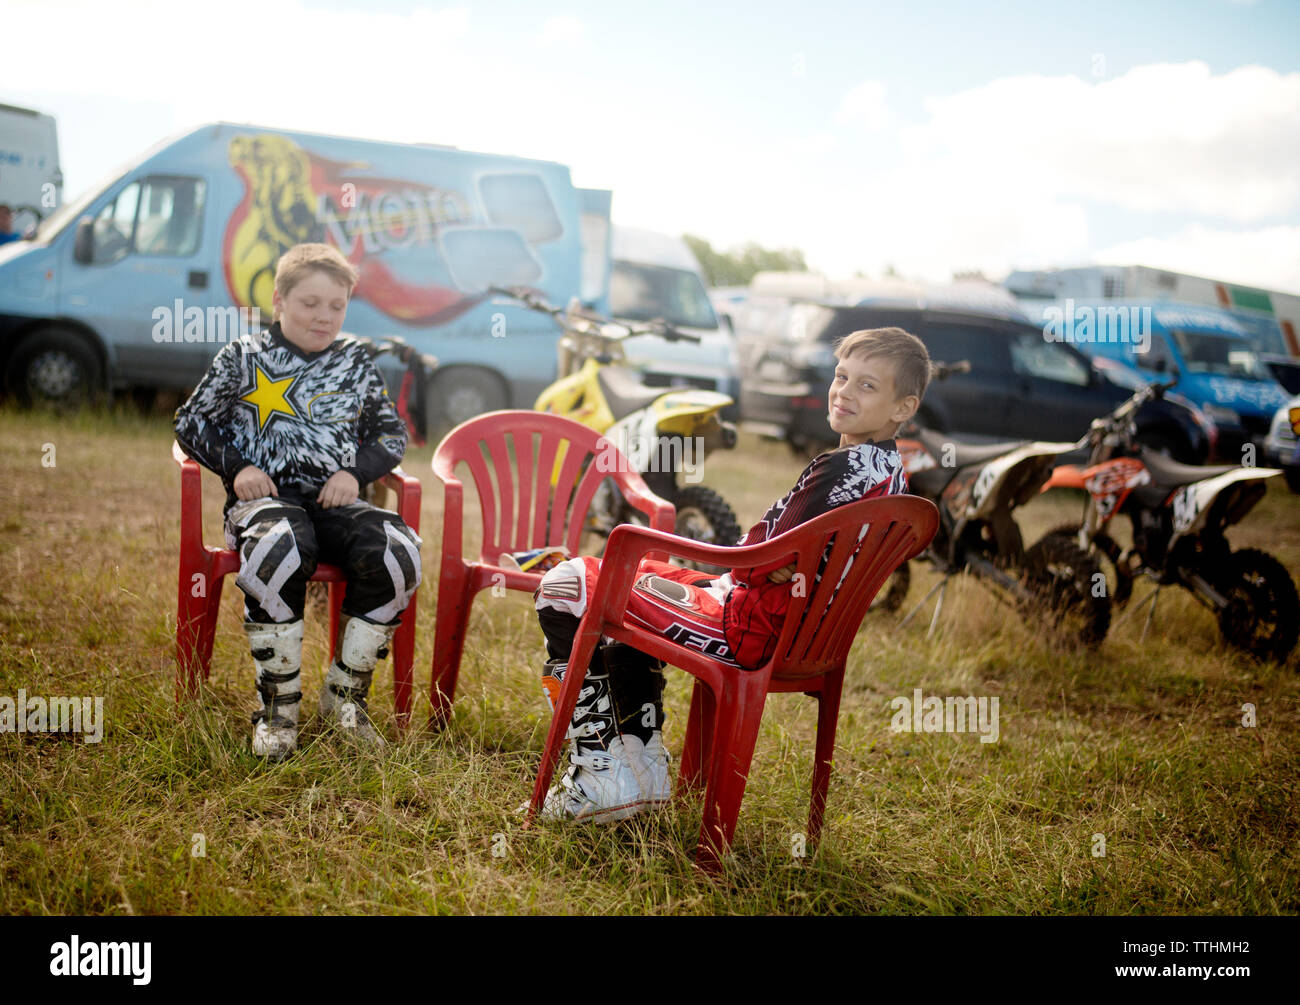 Happy boys sitting on chairs at grassy field Stock Photo